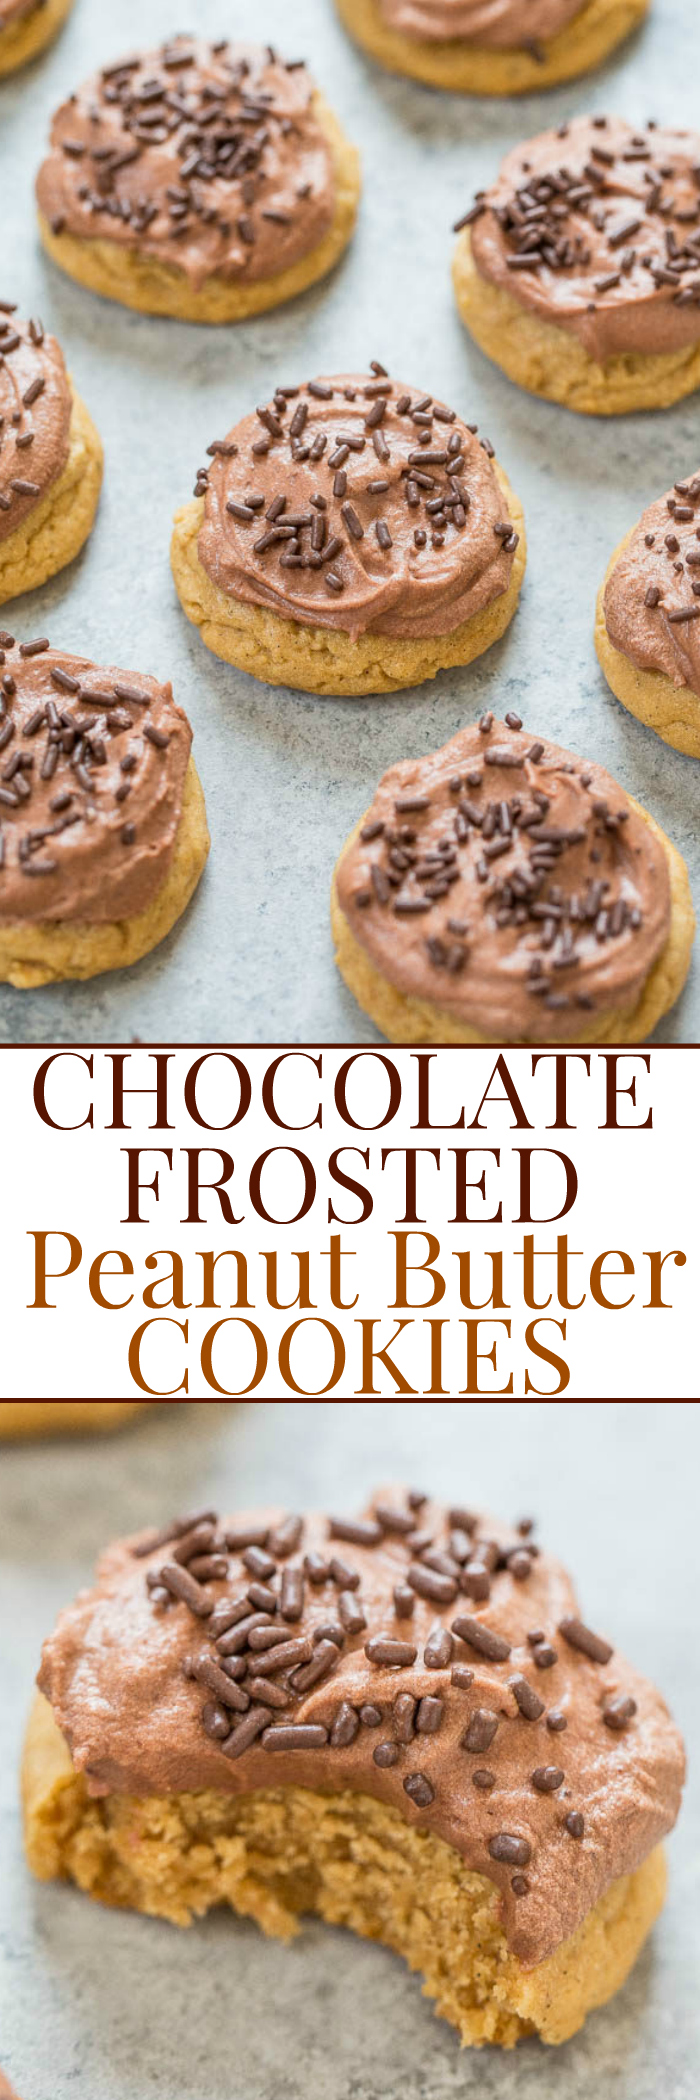 Chocolate Frosted Peanut Butter Cookies - Easy, soft, and chewy cookies that are full of rich peanut butter flavor!! The frosting is light, fluffy, AMAZING, and my new favorite! You'll want to eat it by the spoonful!! 